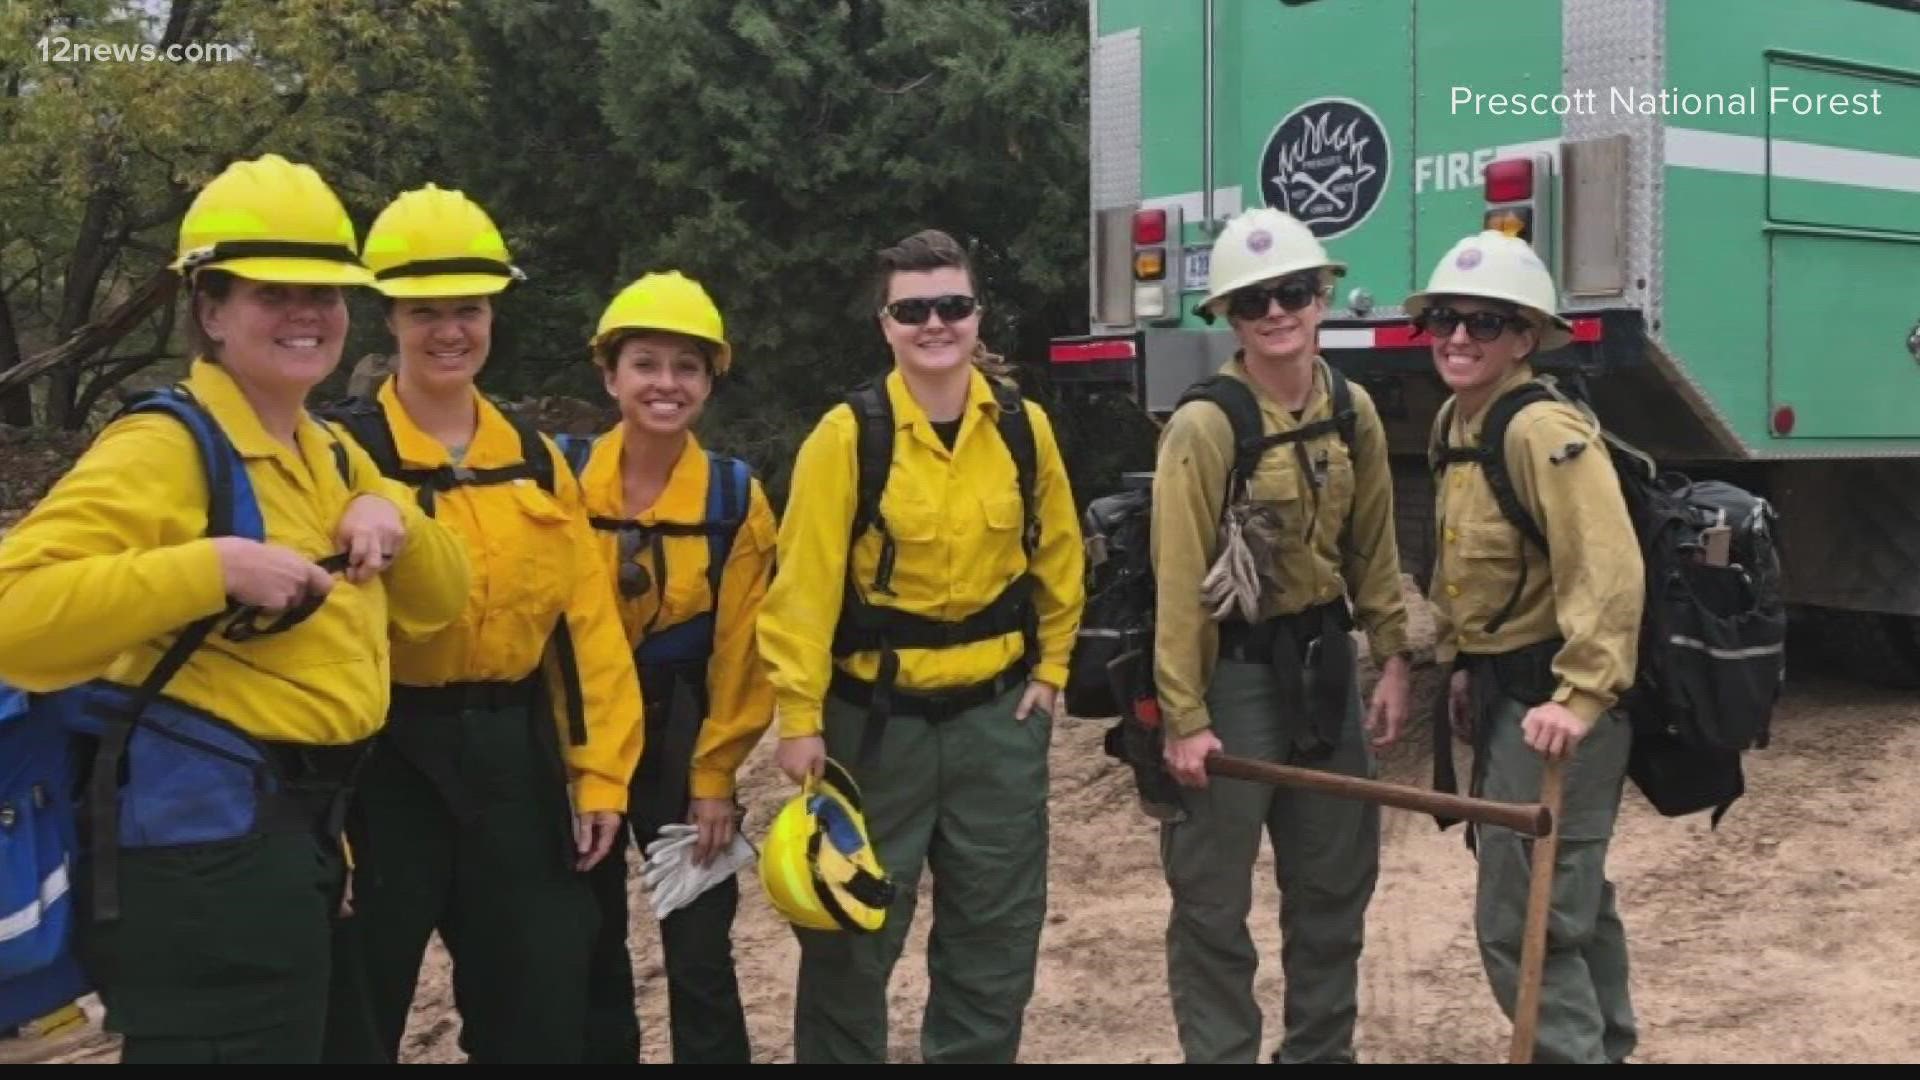 The Prescott National Forest is hoping to give women a leg up on firefighter employment to increase the ratio of women to men in the field.